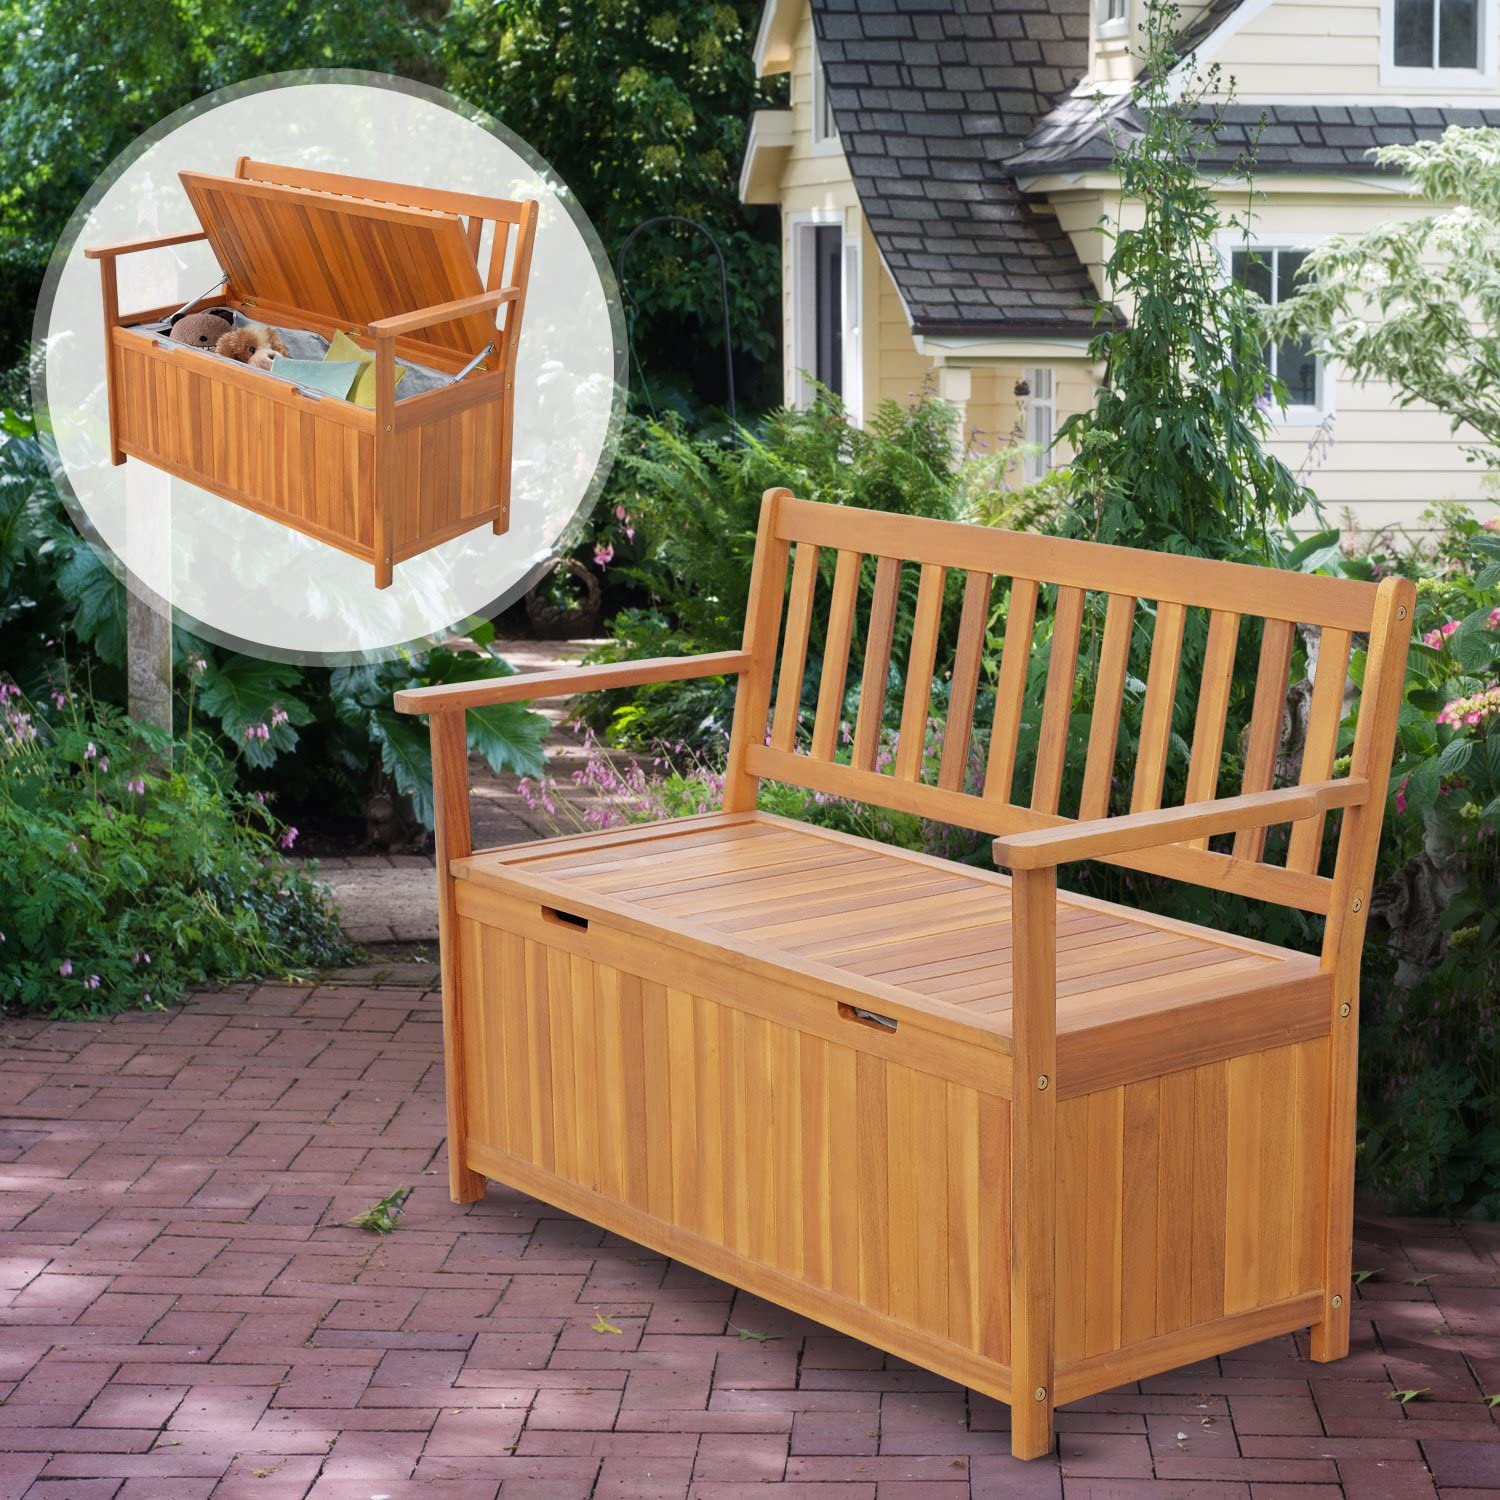 Outsunny 47.25" Wooden Outdoor Storage Bench with PE Lining Deck Box